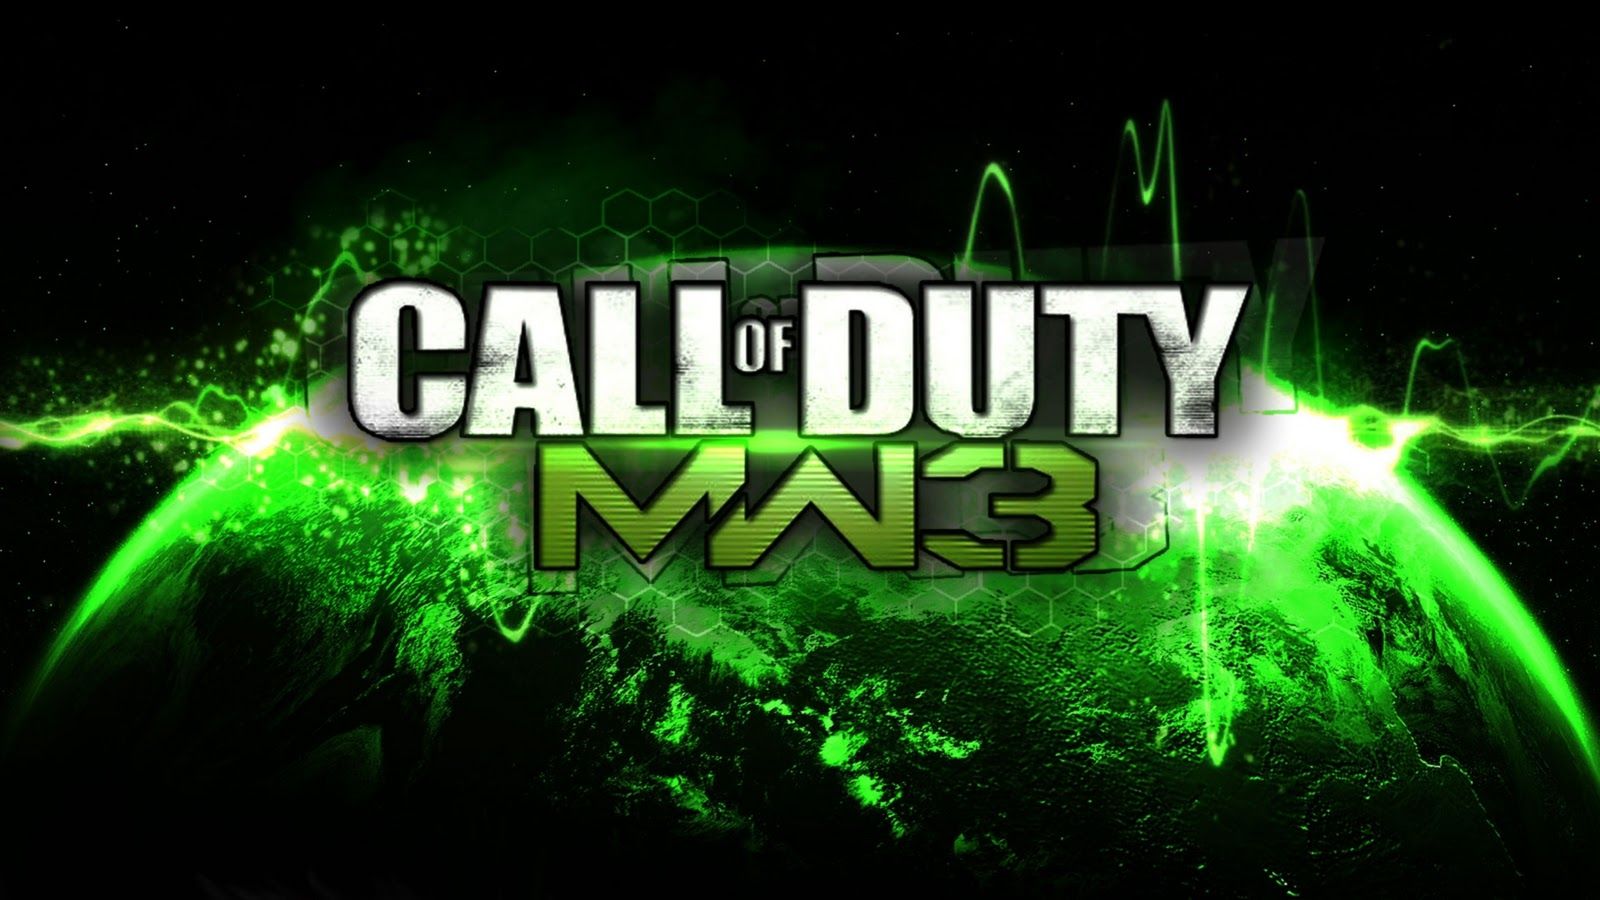 Your Wallpaper: Call of Duty: MW3 Wallpaper